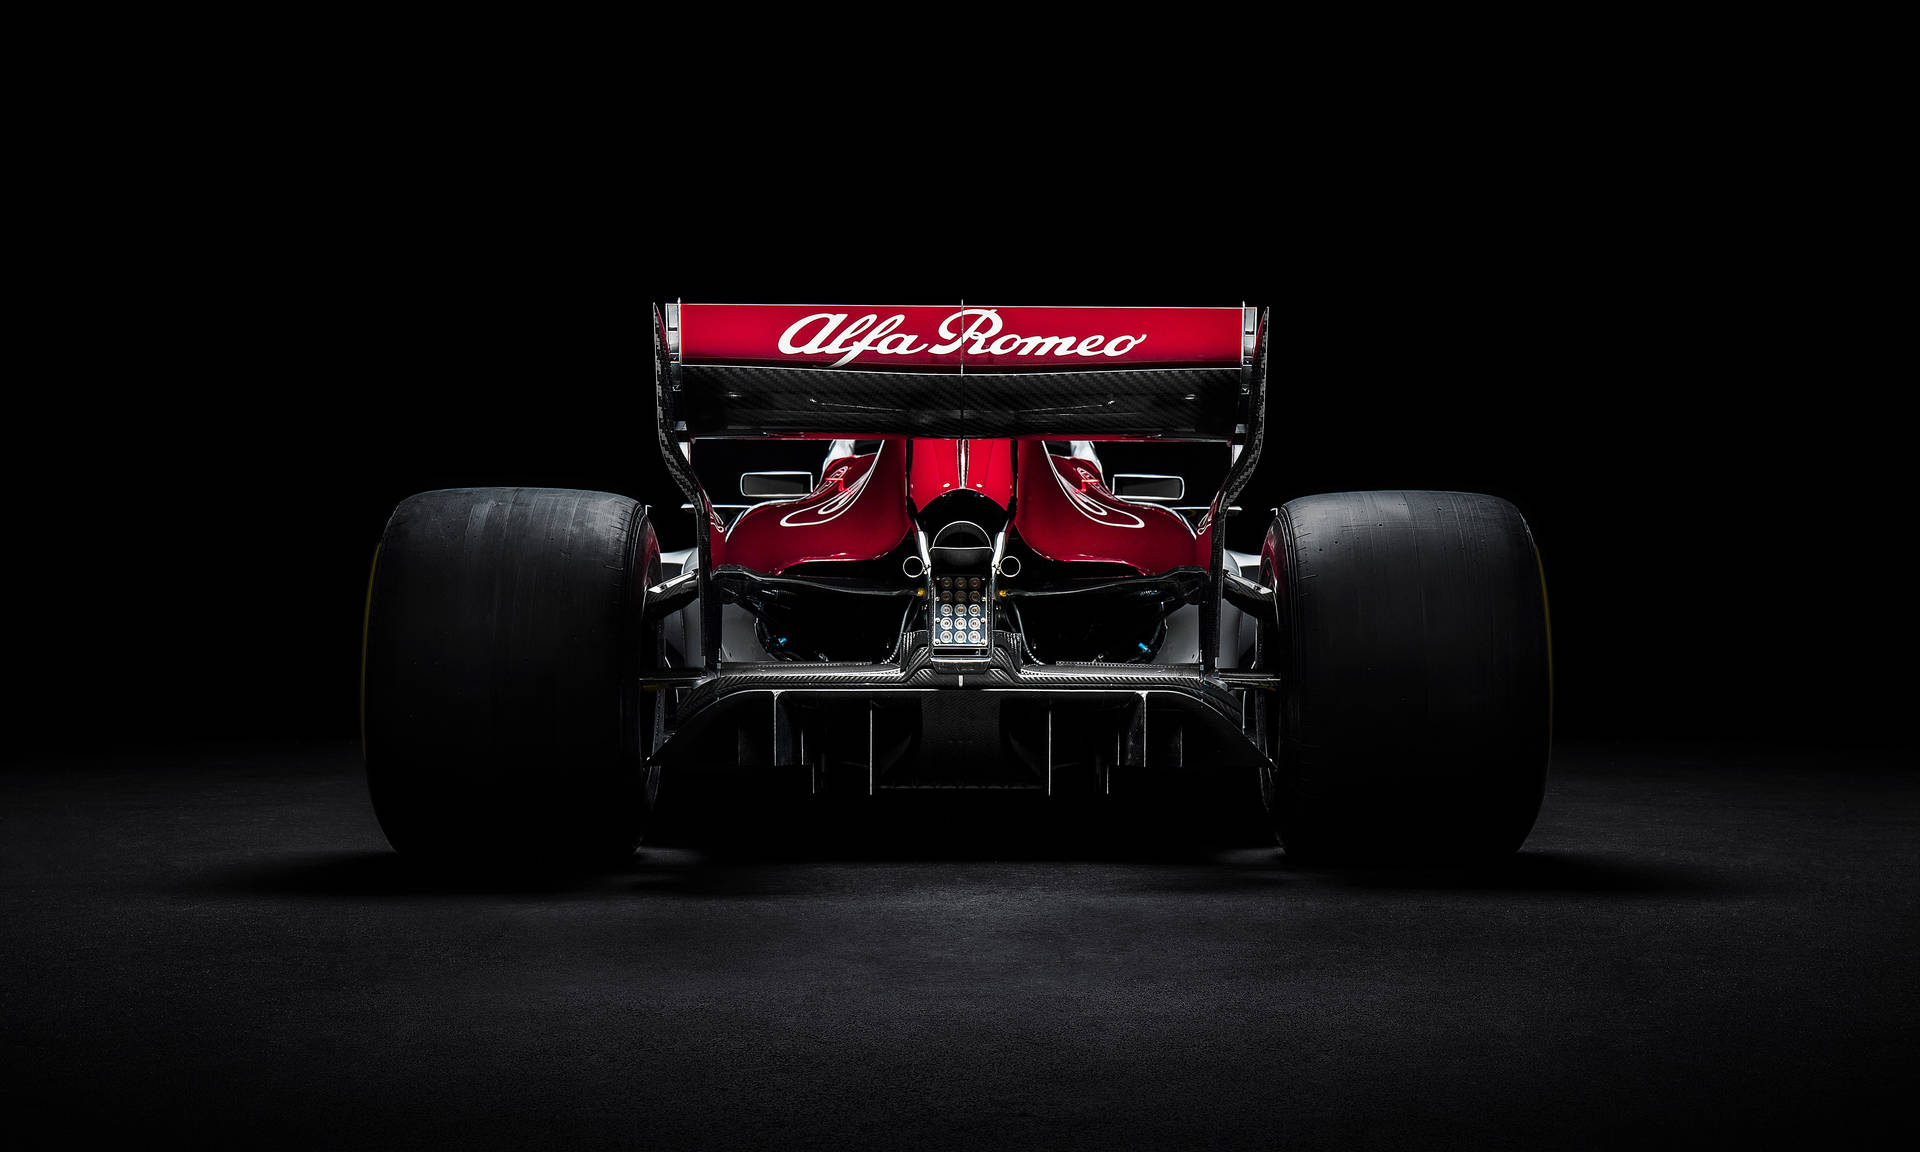 400+] F1 Wallpapers for FREE 